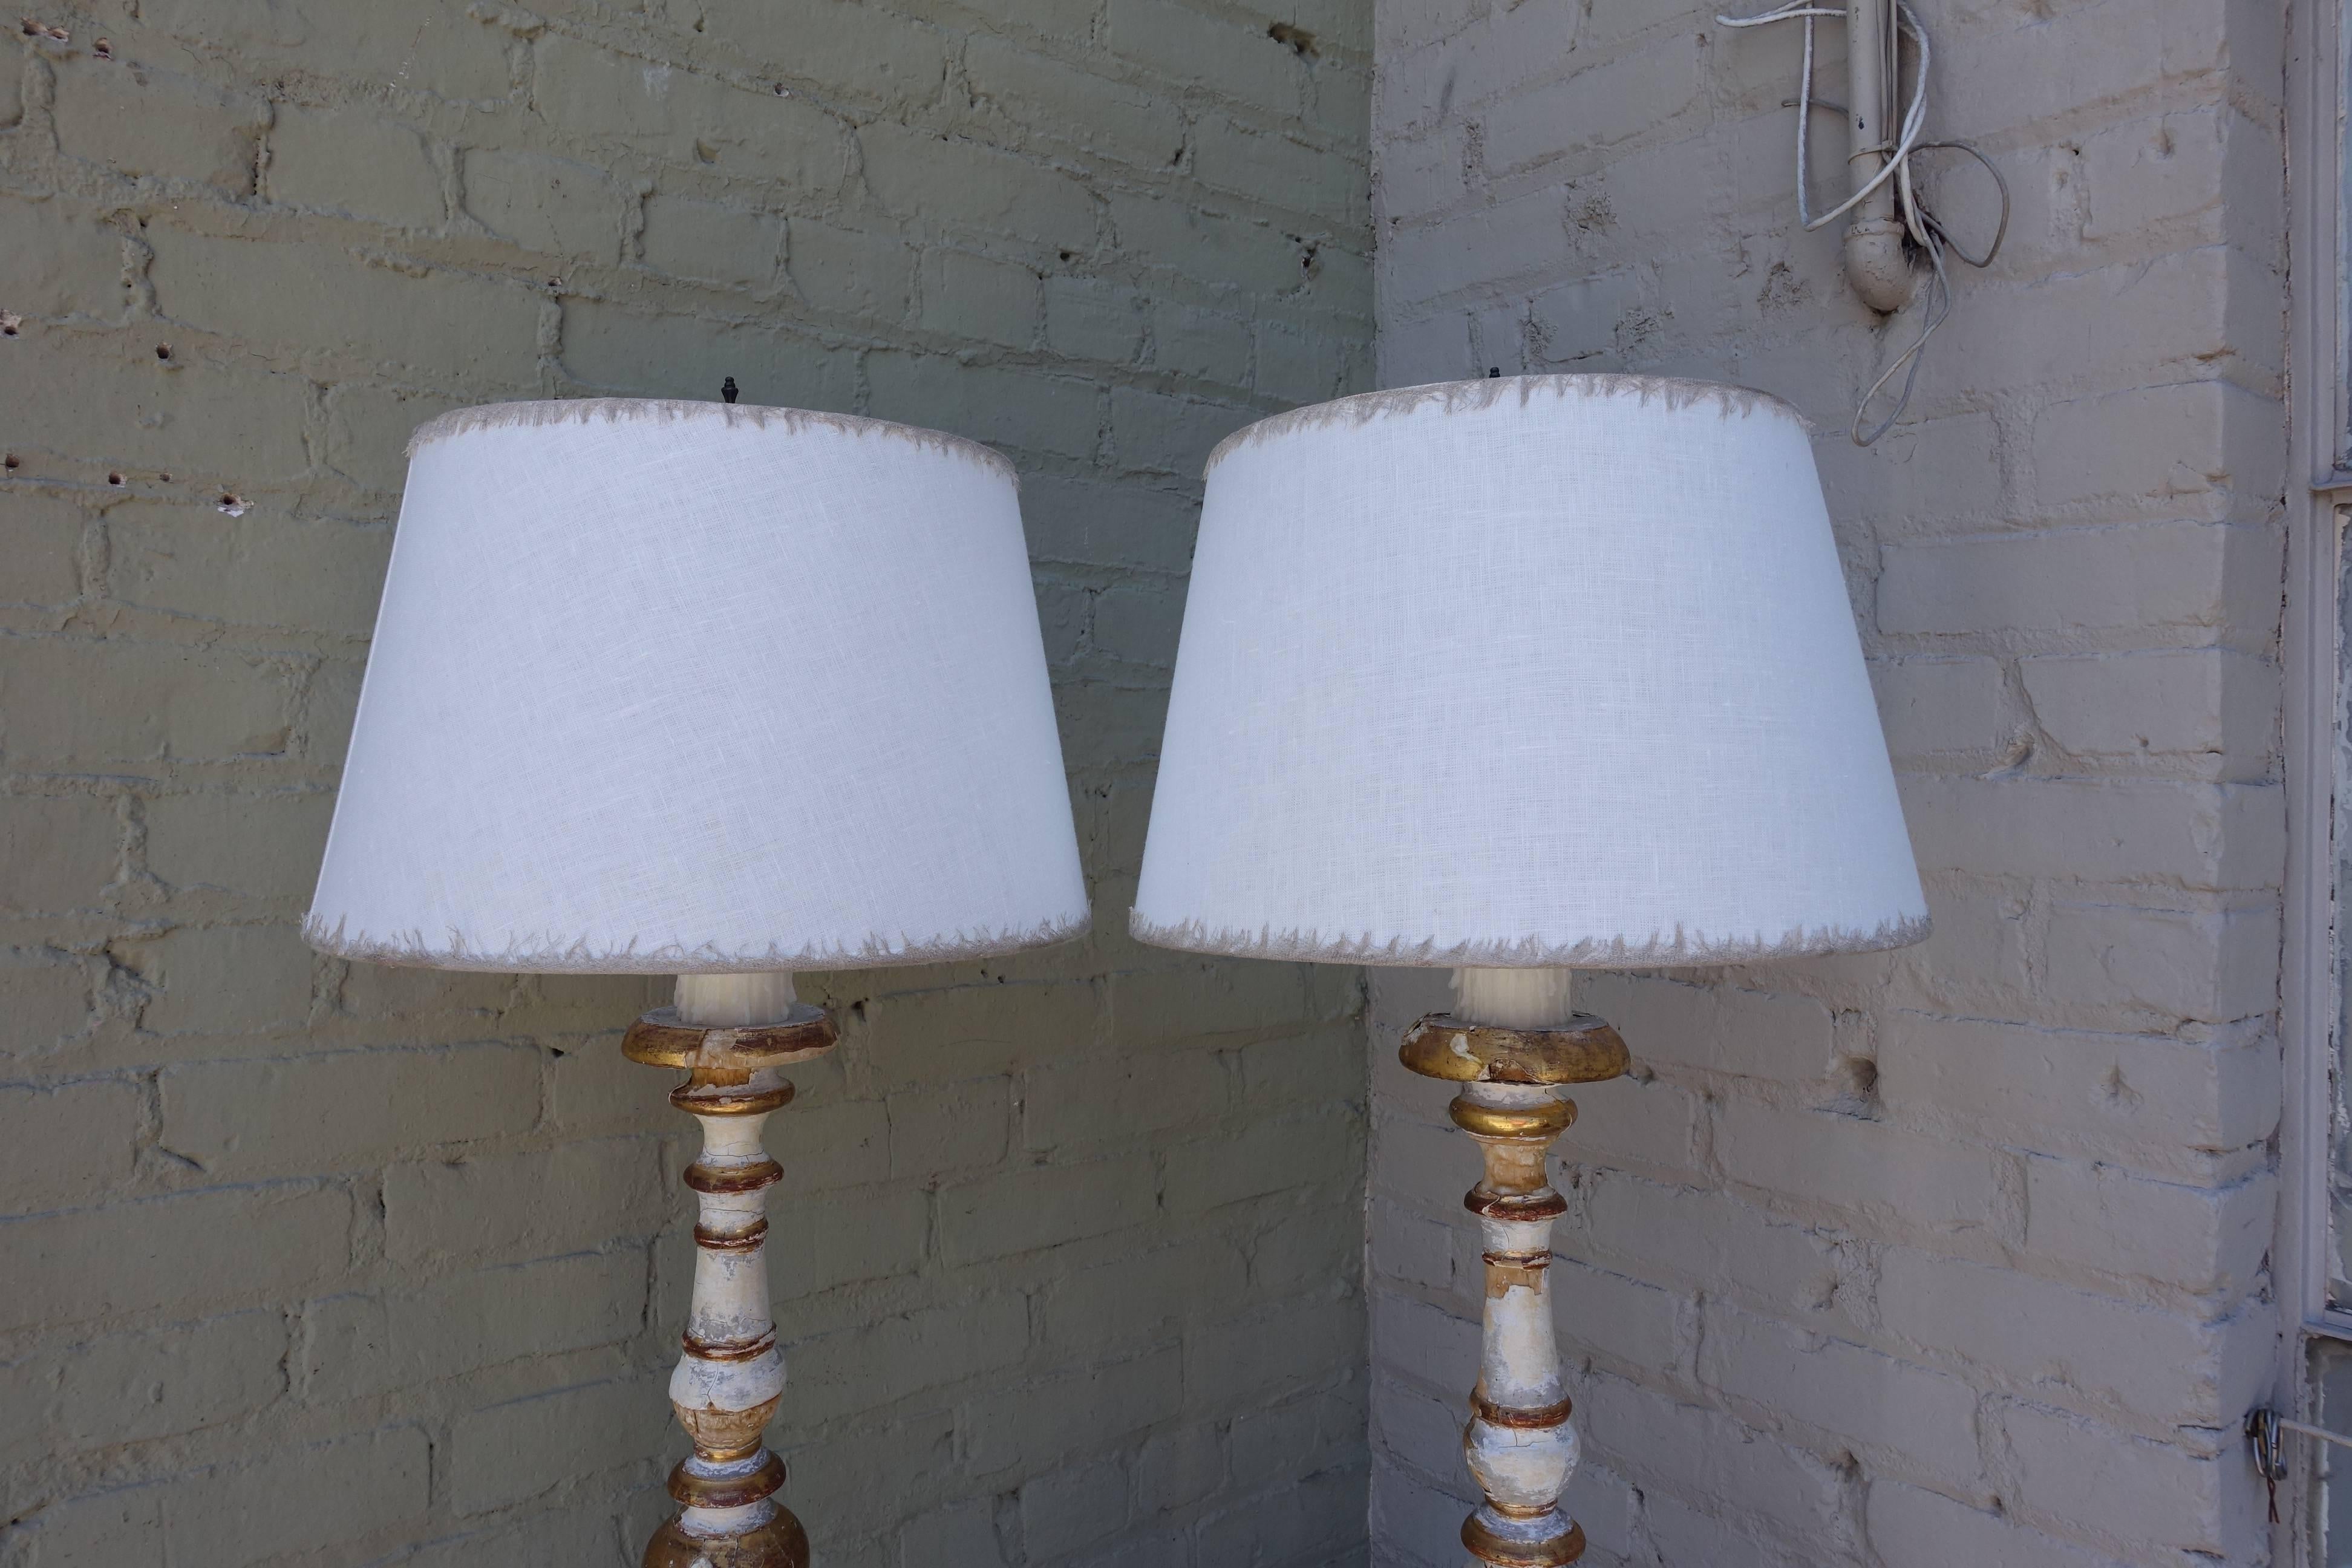 Pair of 19th century Italian painted and parcel gold gilt candlesticks wired into lamps and crowned with custom white linen shades with eyelash trim detail.